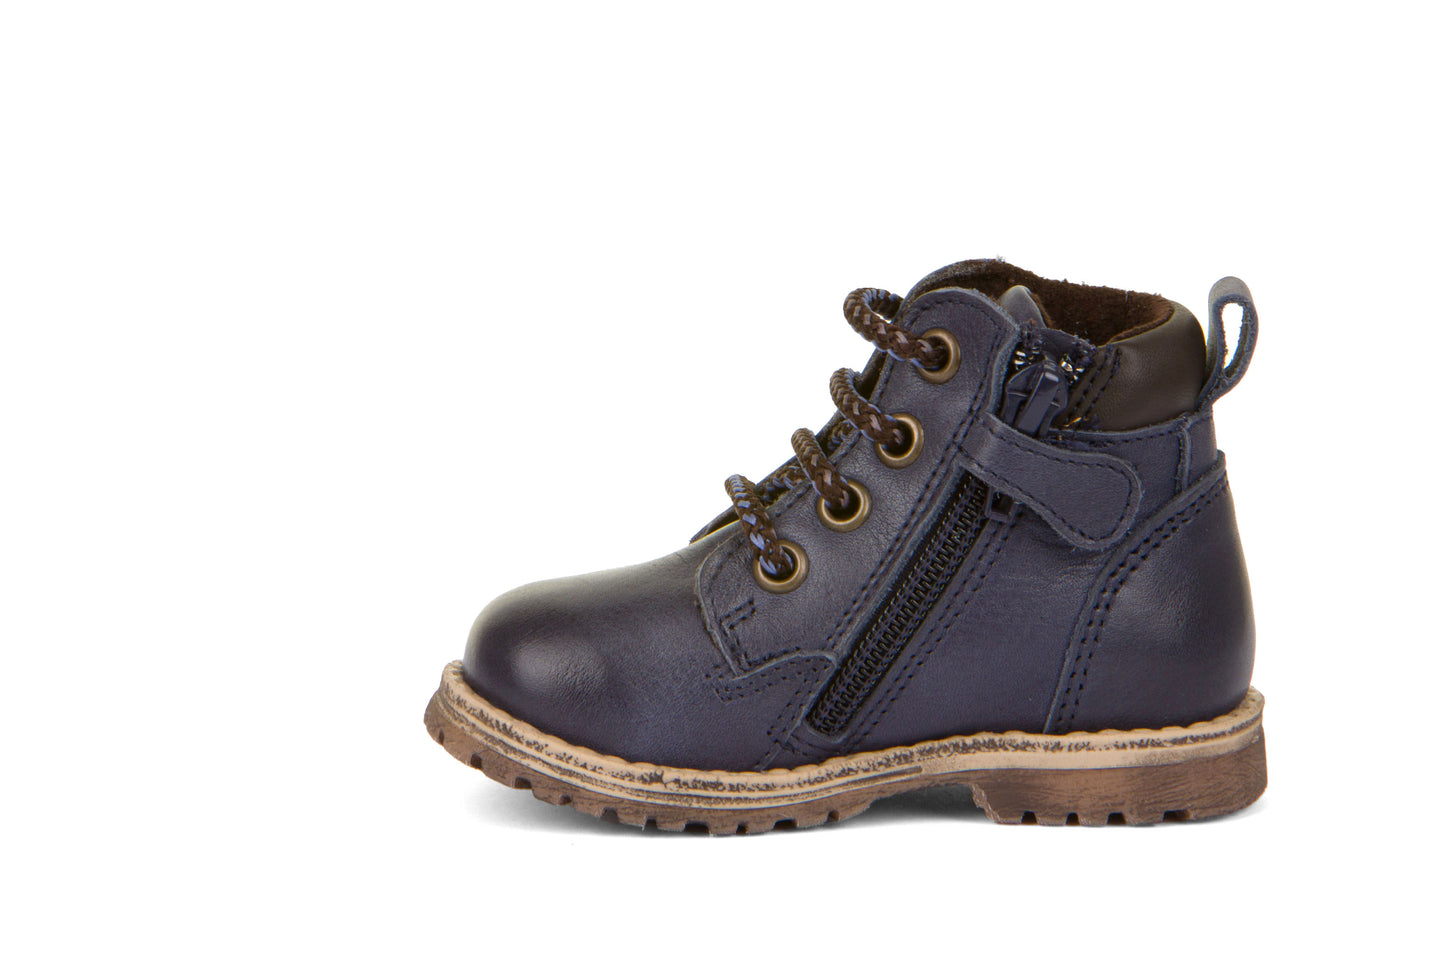 A boys boot by Froddo, style Mono  G2110108-2 in Navy with lace, zip fastening. Left side view.